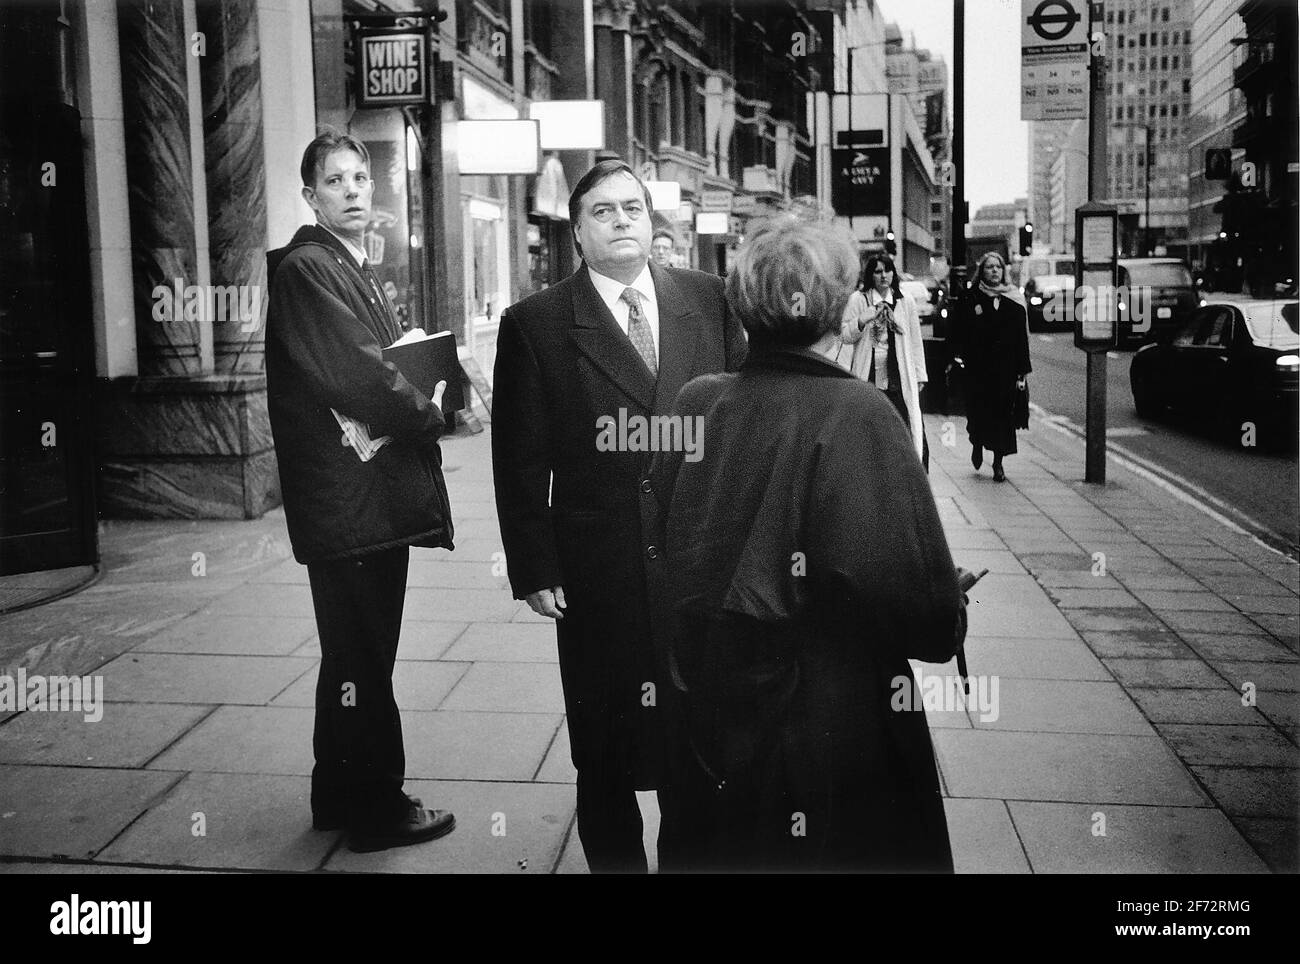 JOHN PRESCOTT LABOUR MP( WITH JEFF POSTLEWAITE(L) A MEMBER OF HIS OFFICE STAFF), WAITS IN VICTORIA, LONDON, FOR HIS MISLAID CAR TO TAKE HIM TO TALK WITH LABOUR PARTYS PROSPECTIVE ELECTION CANDIDATES AT VICTORIA, LONDON. AFTER EARLY MORNING PHOTOCALL.PHOTO: BRIAN HARRIS Stock Photo